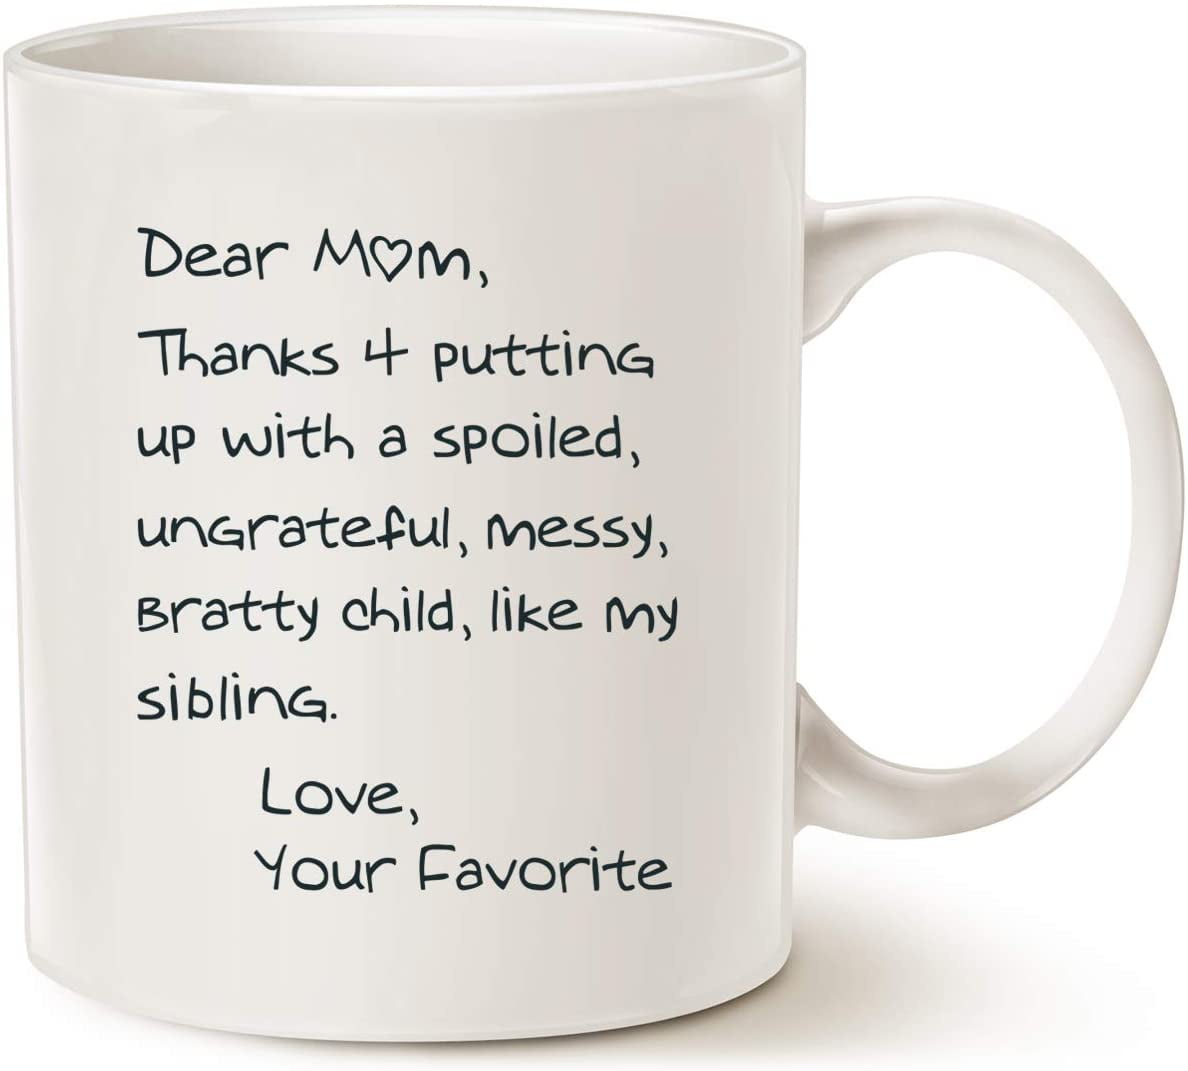 Funny Coffee Mugs Mothers Day Gifts for Dear Mom, Thanks 4 Putting up ...